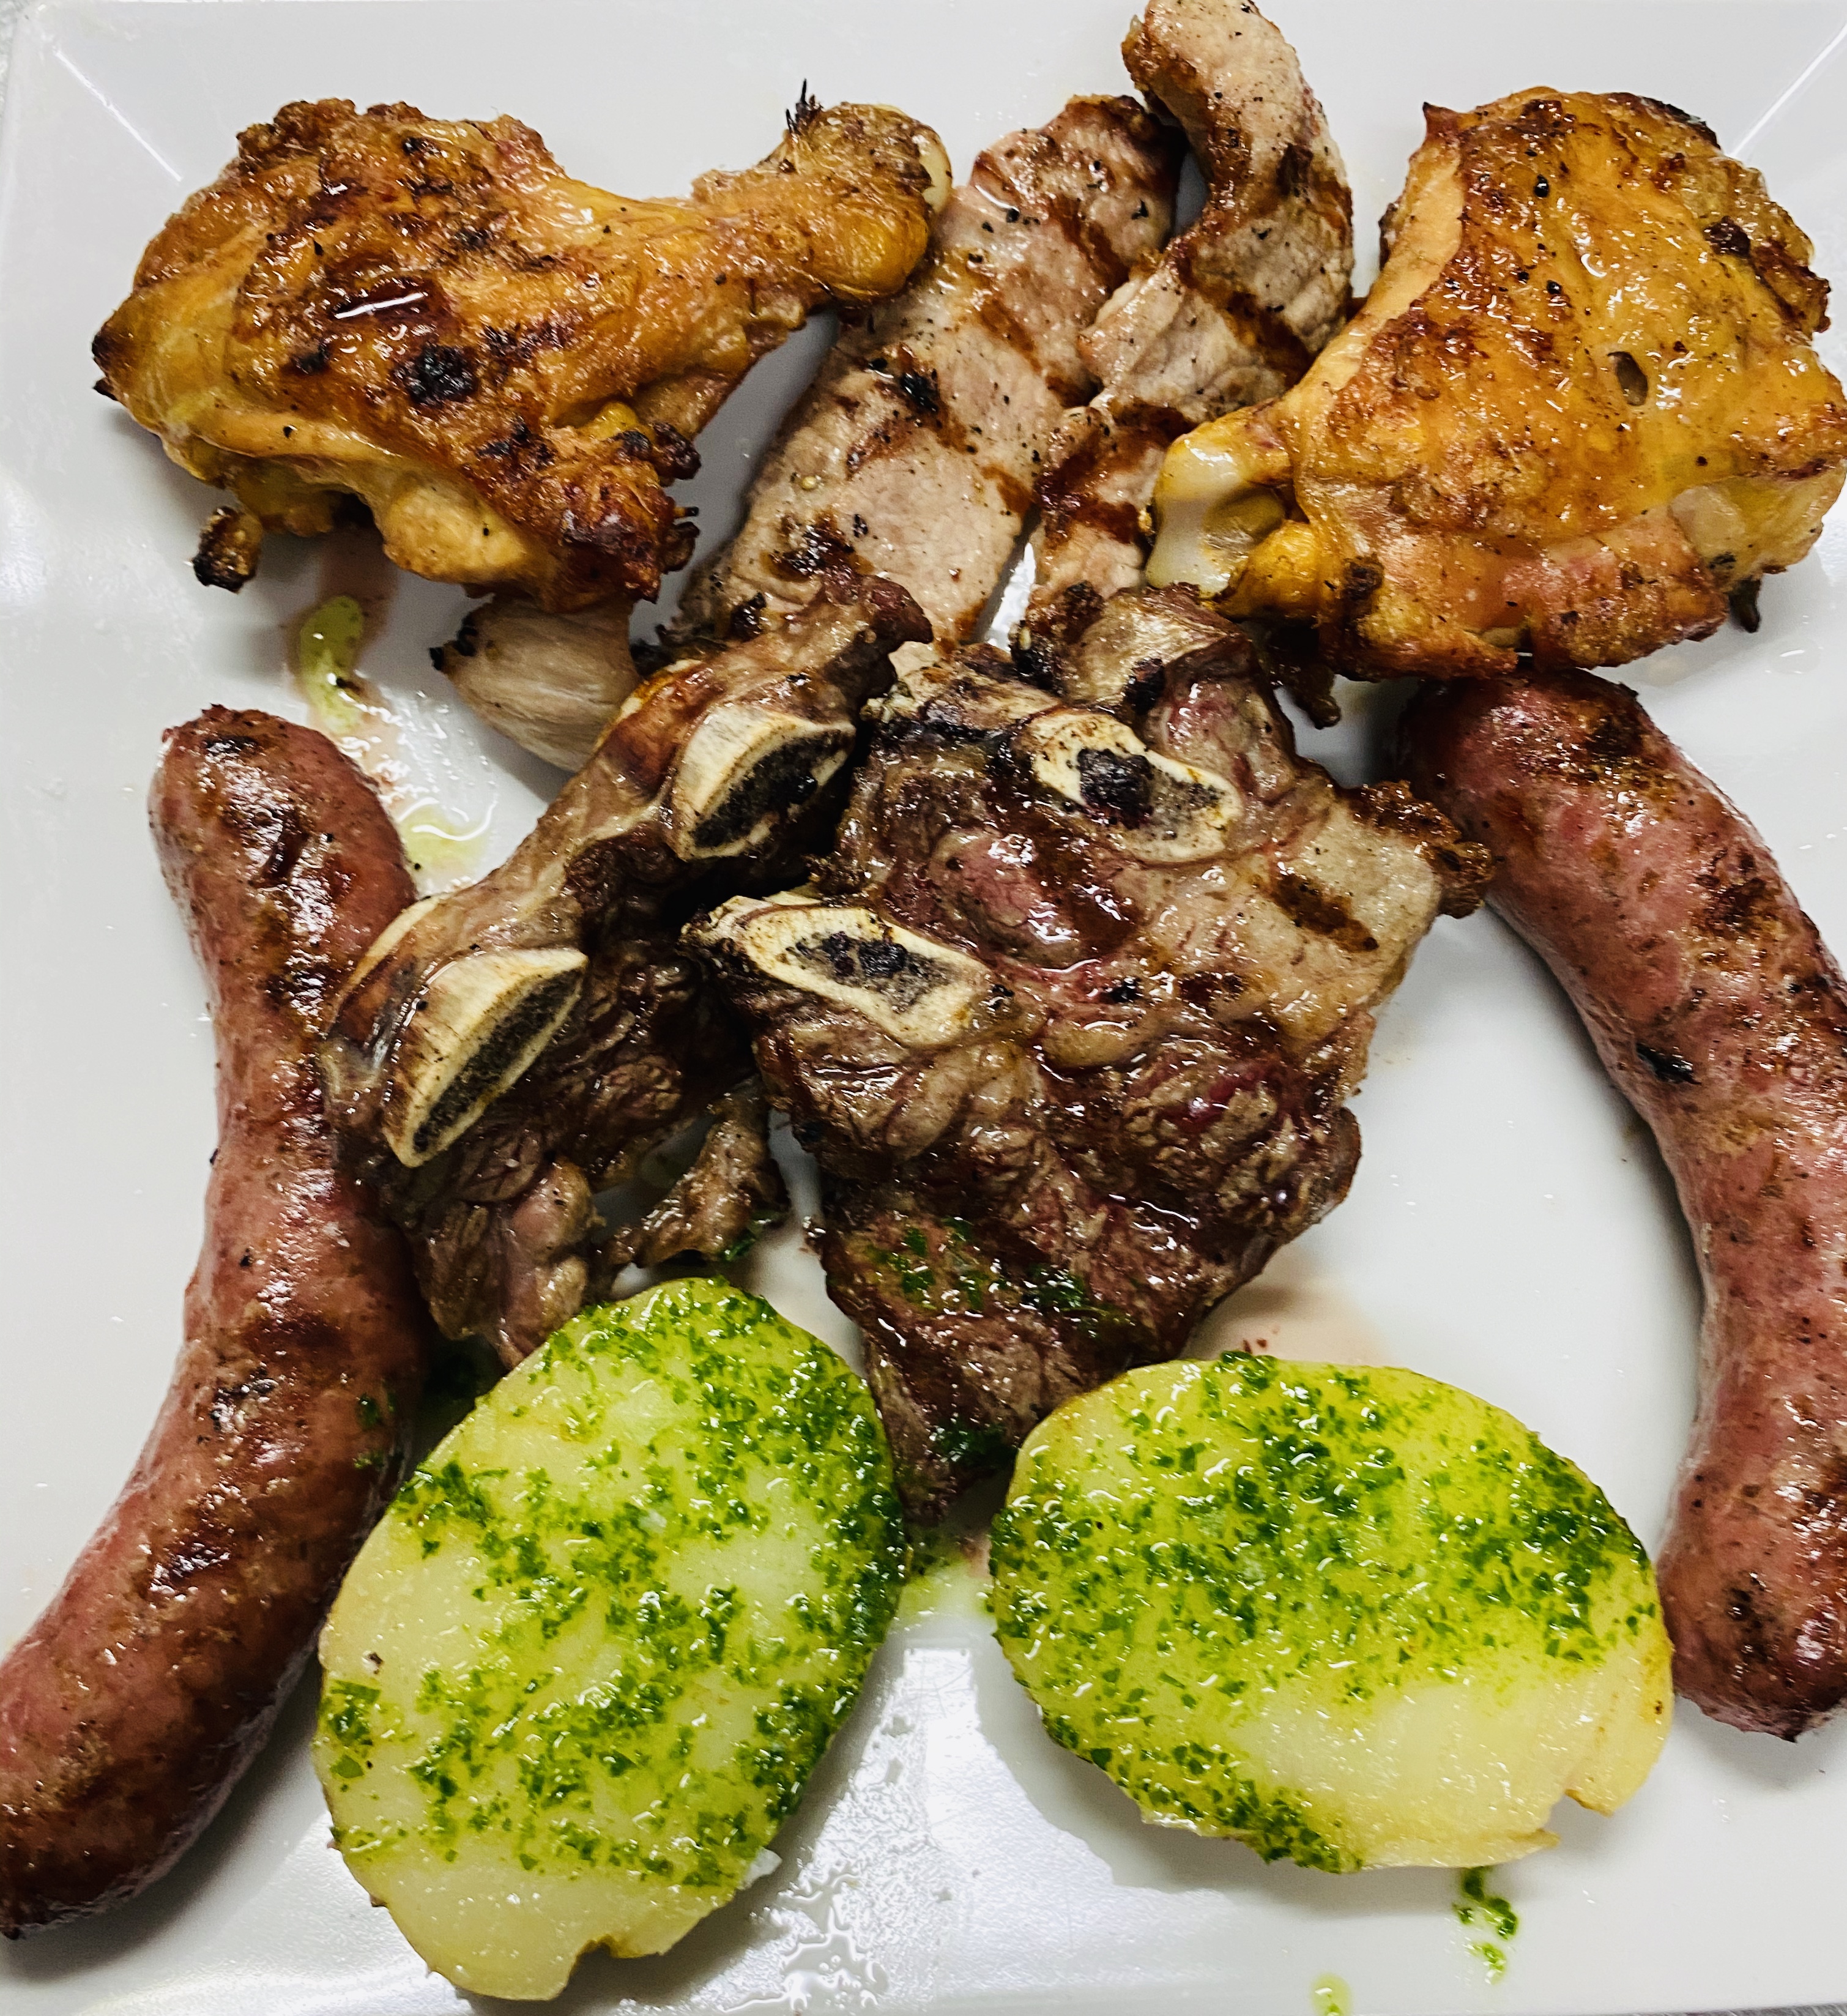 ASSORTMENT OF GRILLED MEAT (2 people)